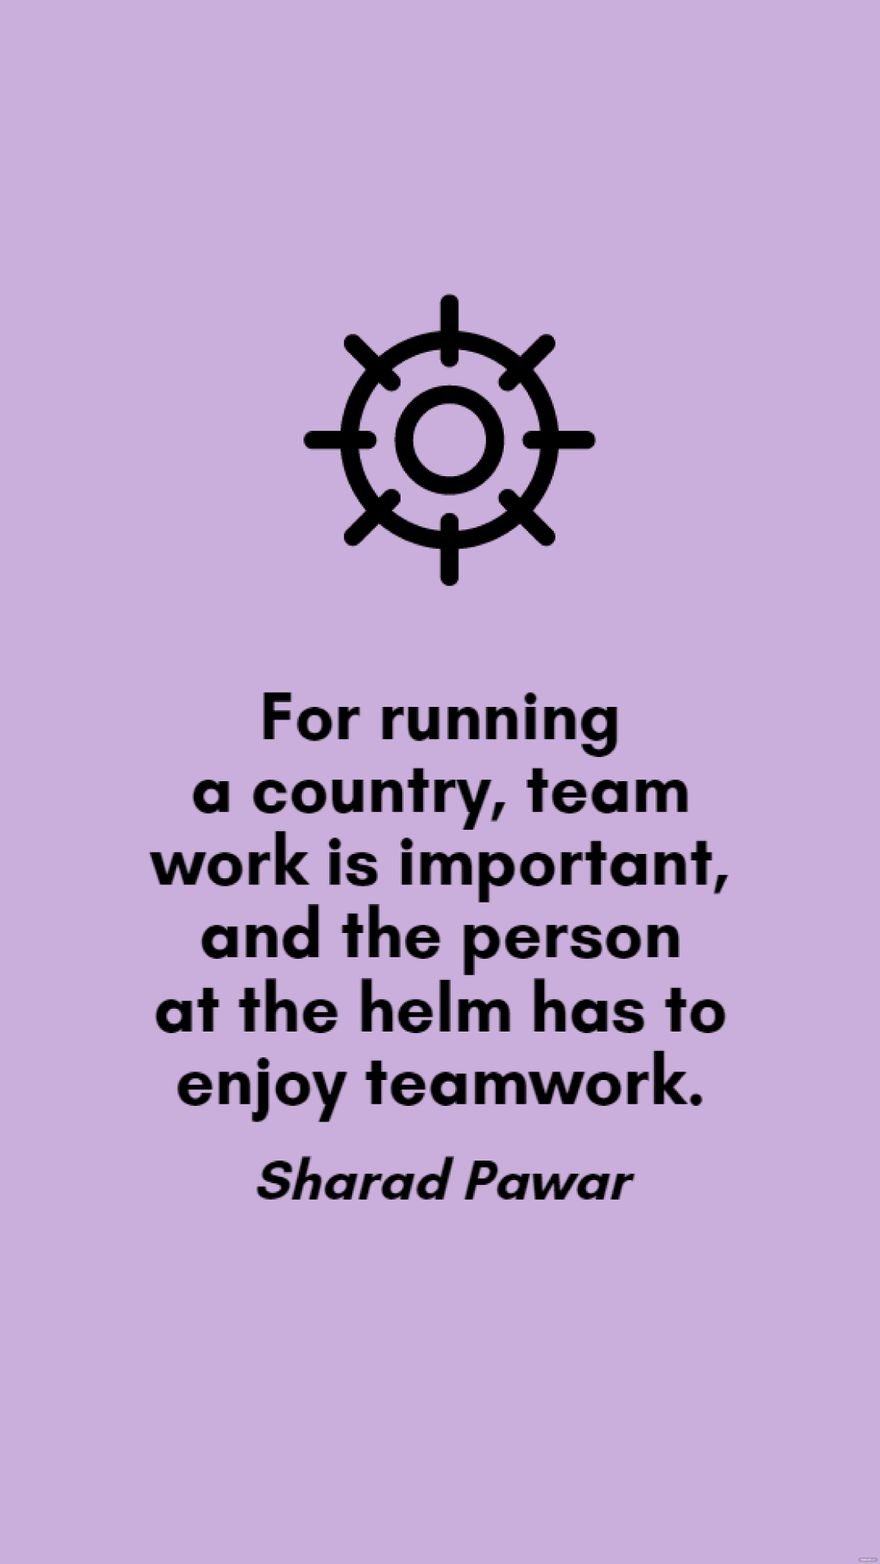 Sharad Pawar - For running a country, team work is important, and the person at the helm has to enjoy teamwork. in JPG